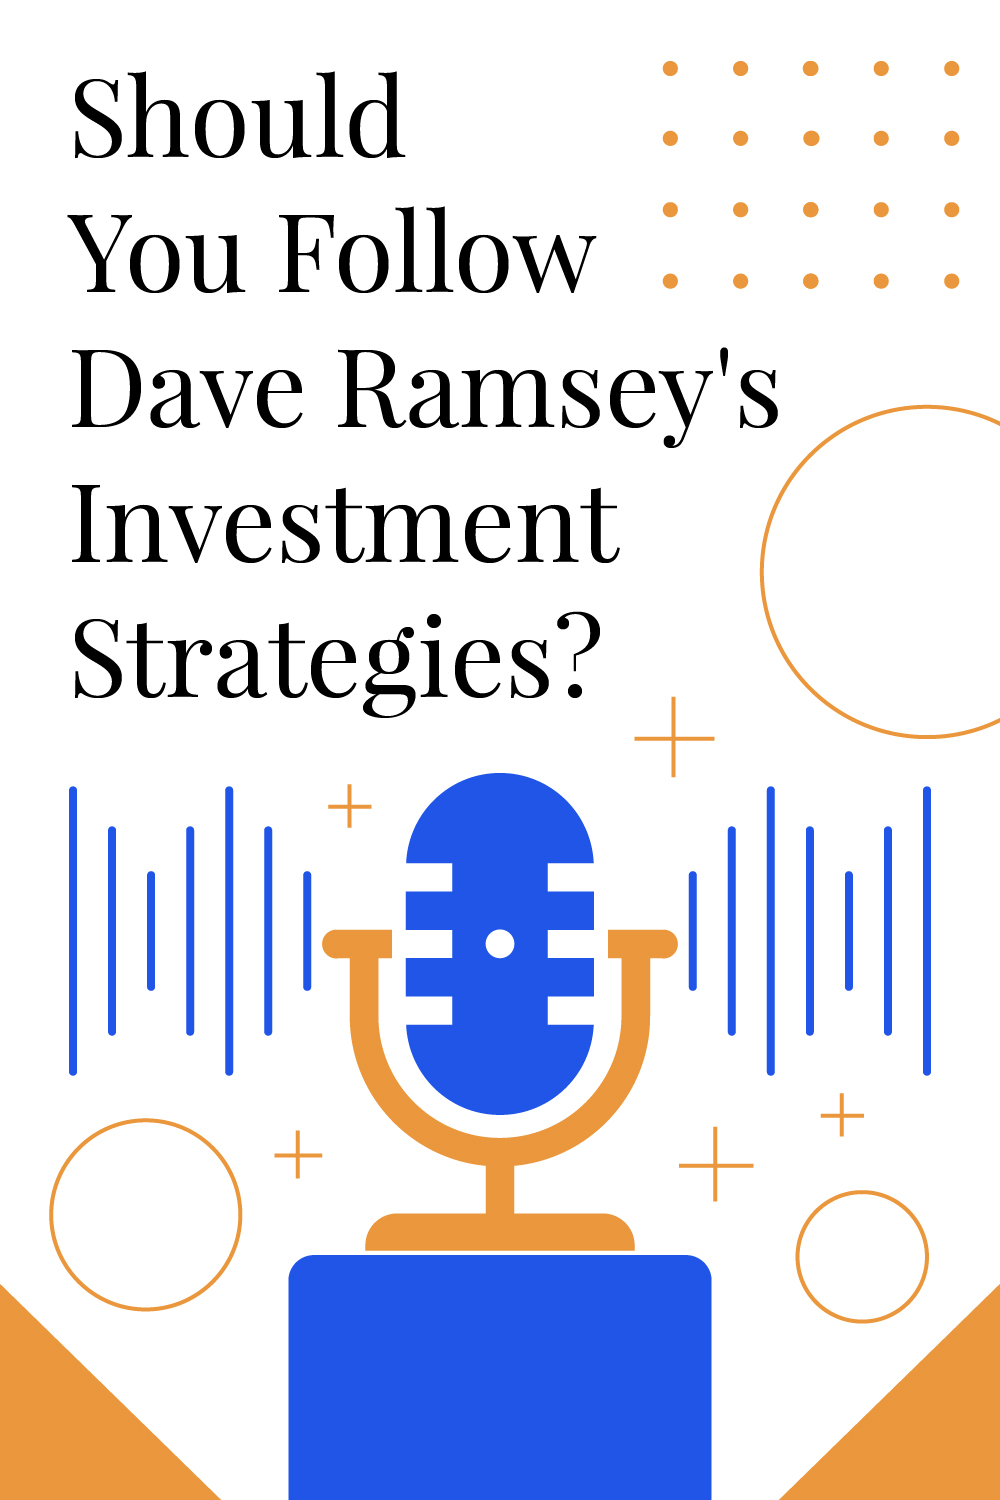 Should You Follow Dave Ramsey’s Investment Strategies?